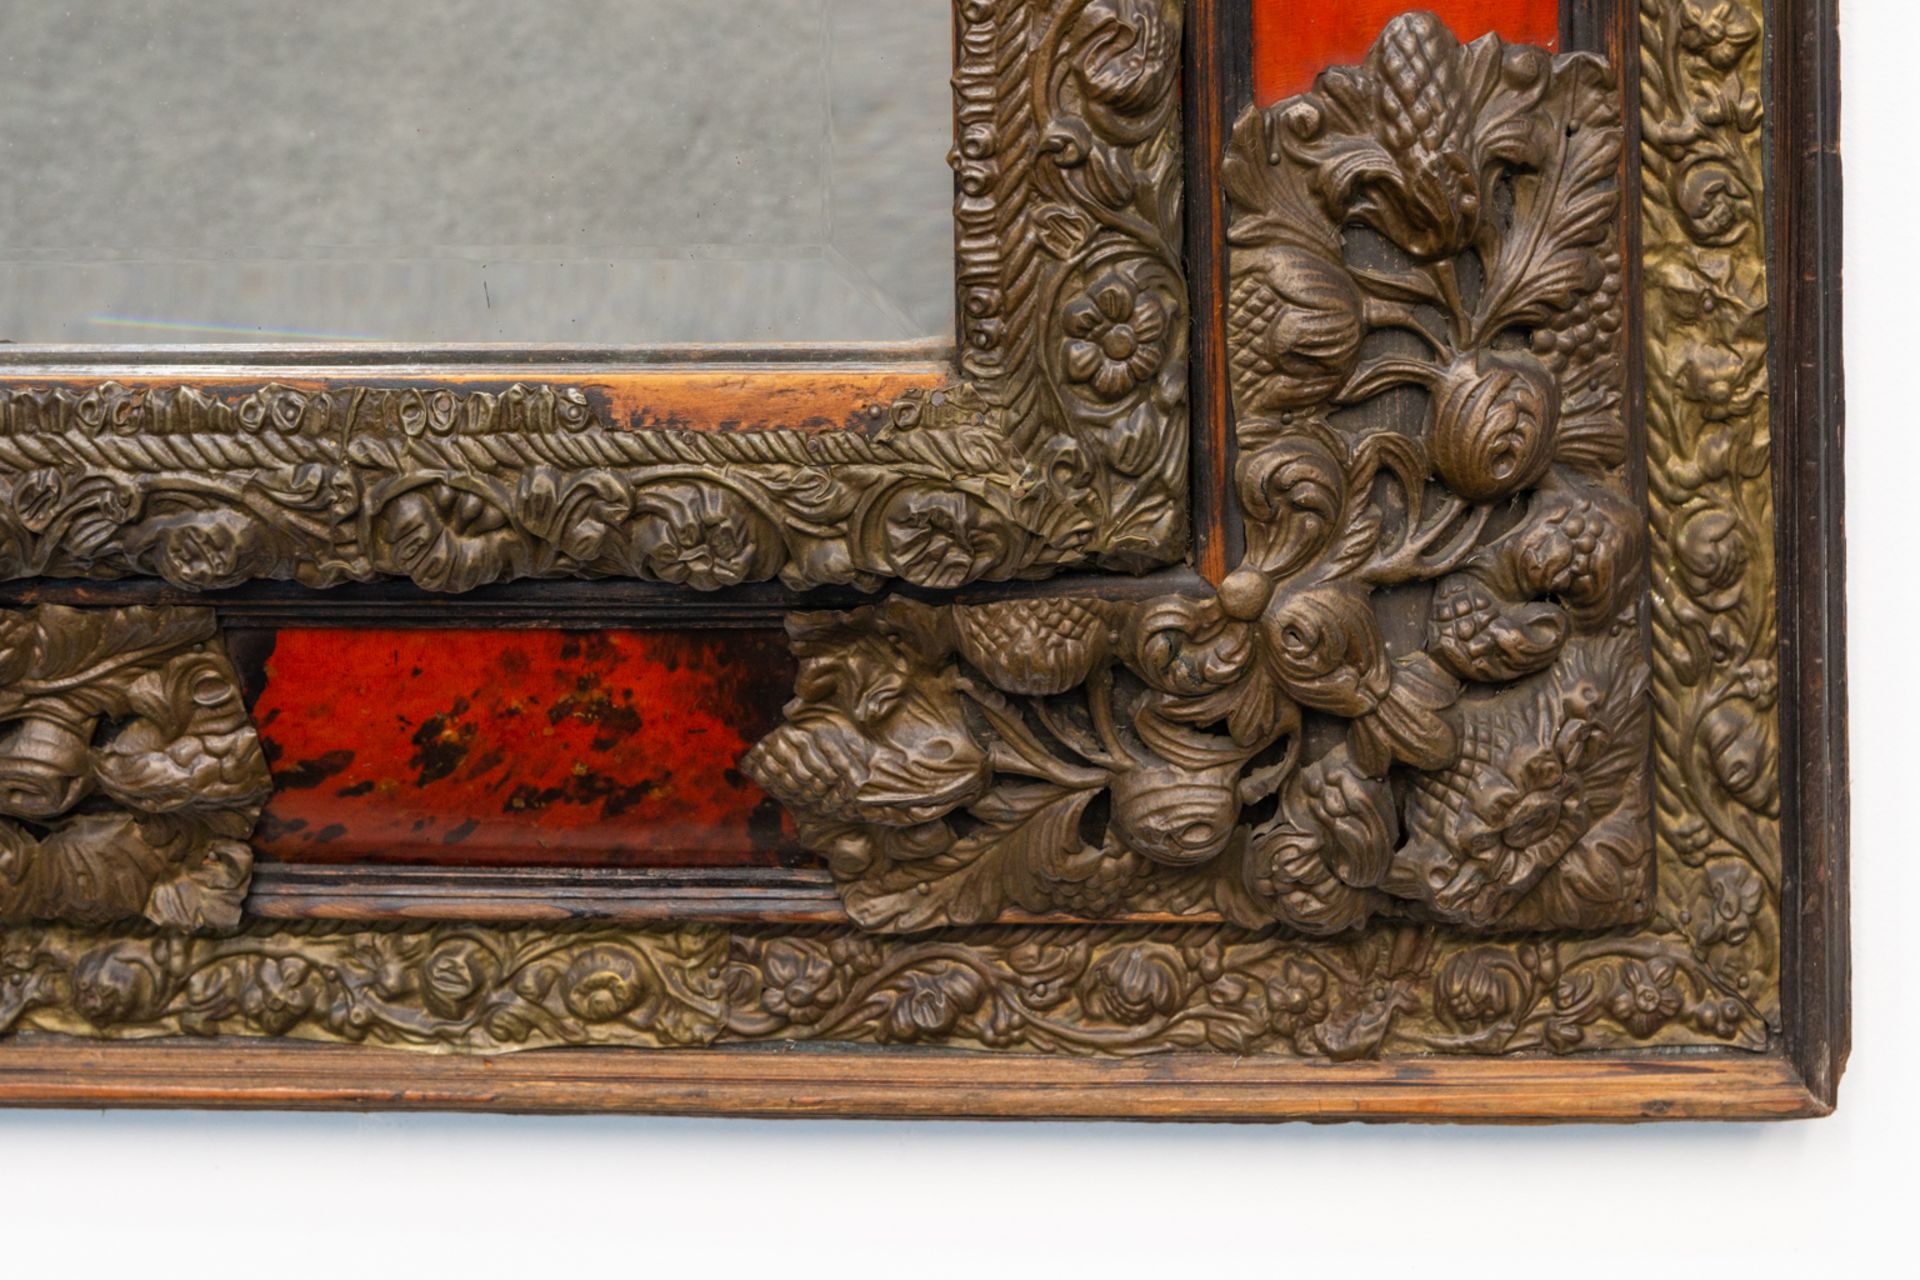 An antique mirror made of glass, copper and tortoise shell. 19th century. (94 x 113 cm) - Bild 5 aus 8